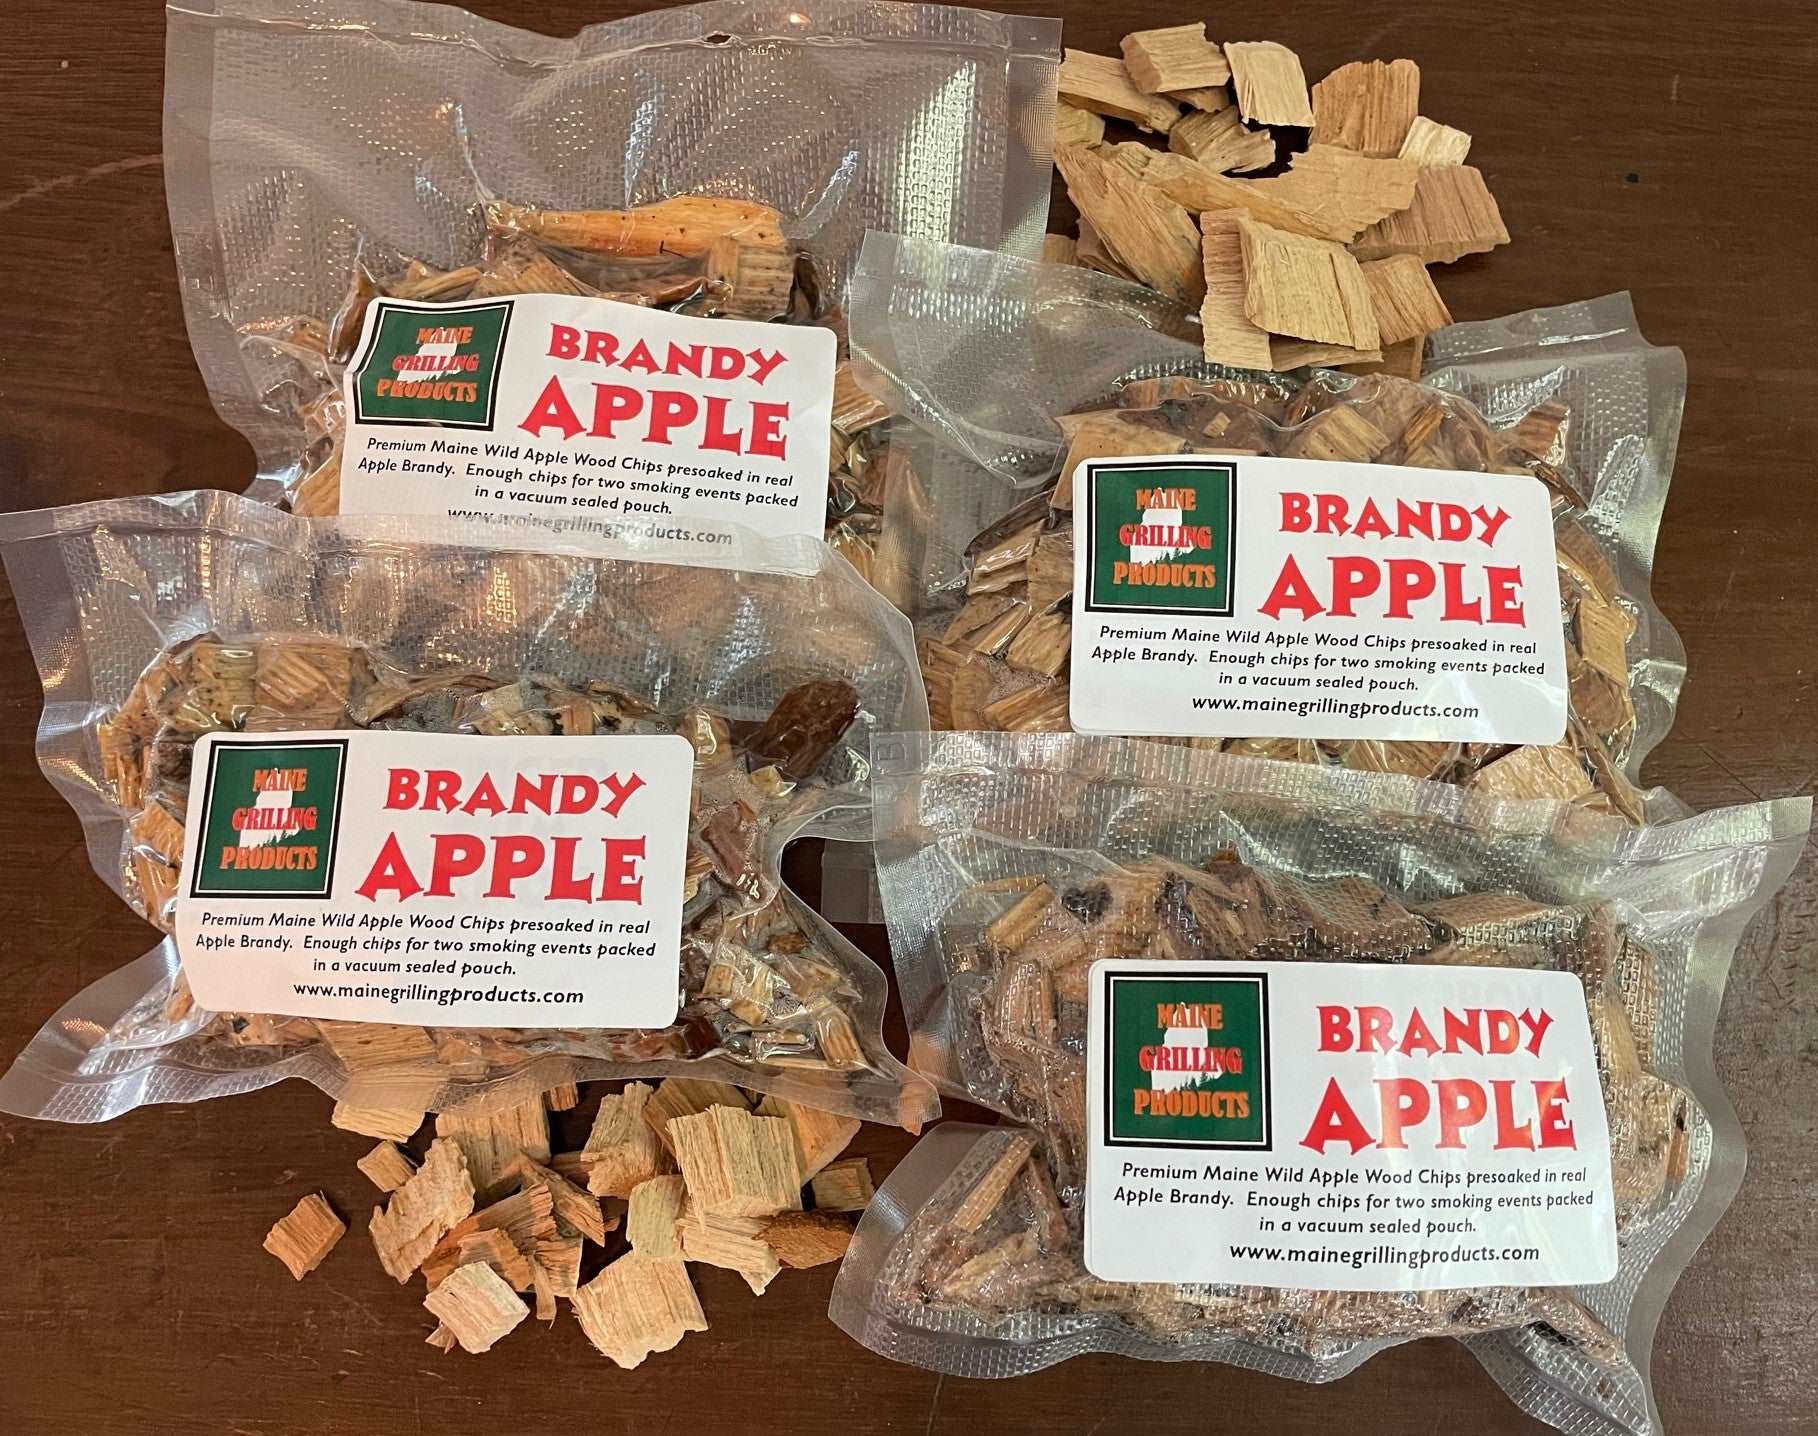 FOUR (6 OZ Pouches) PRE-SOAKED MAINE BRANDY APPLE WOOD CHIPS